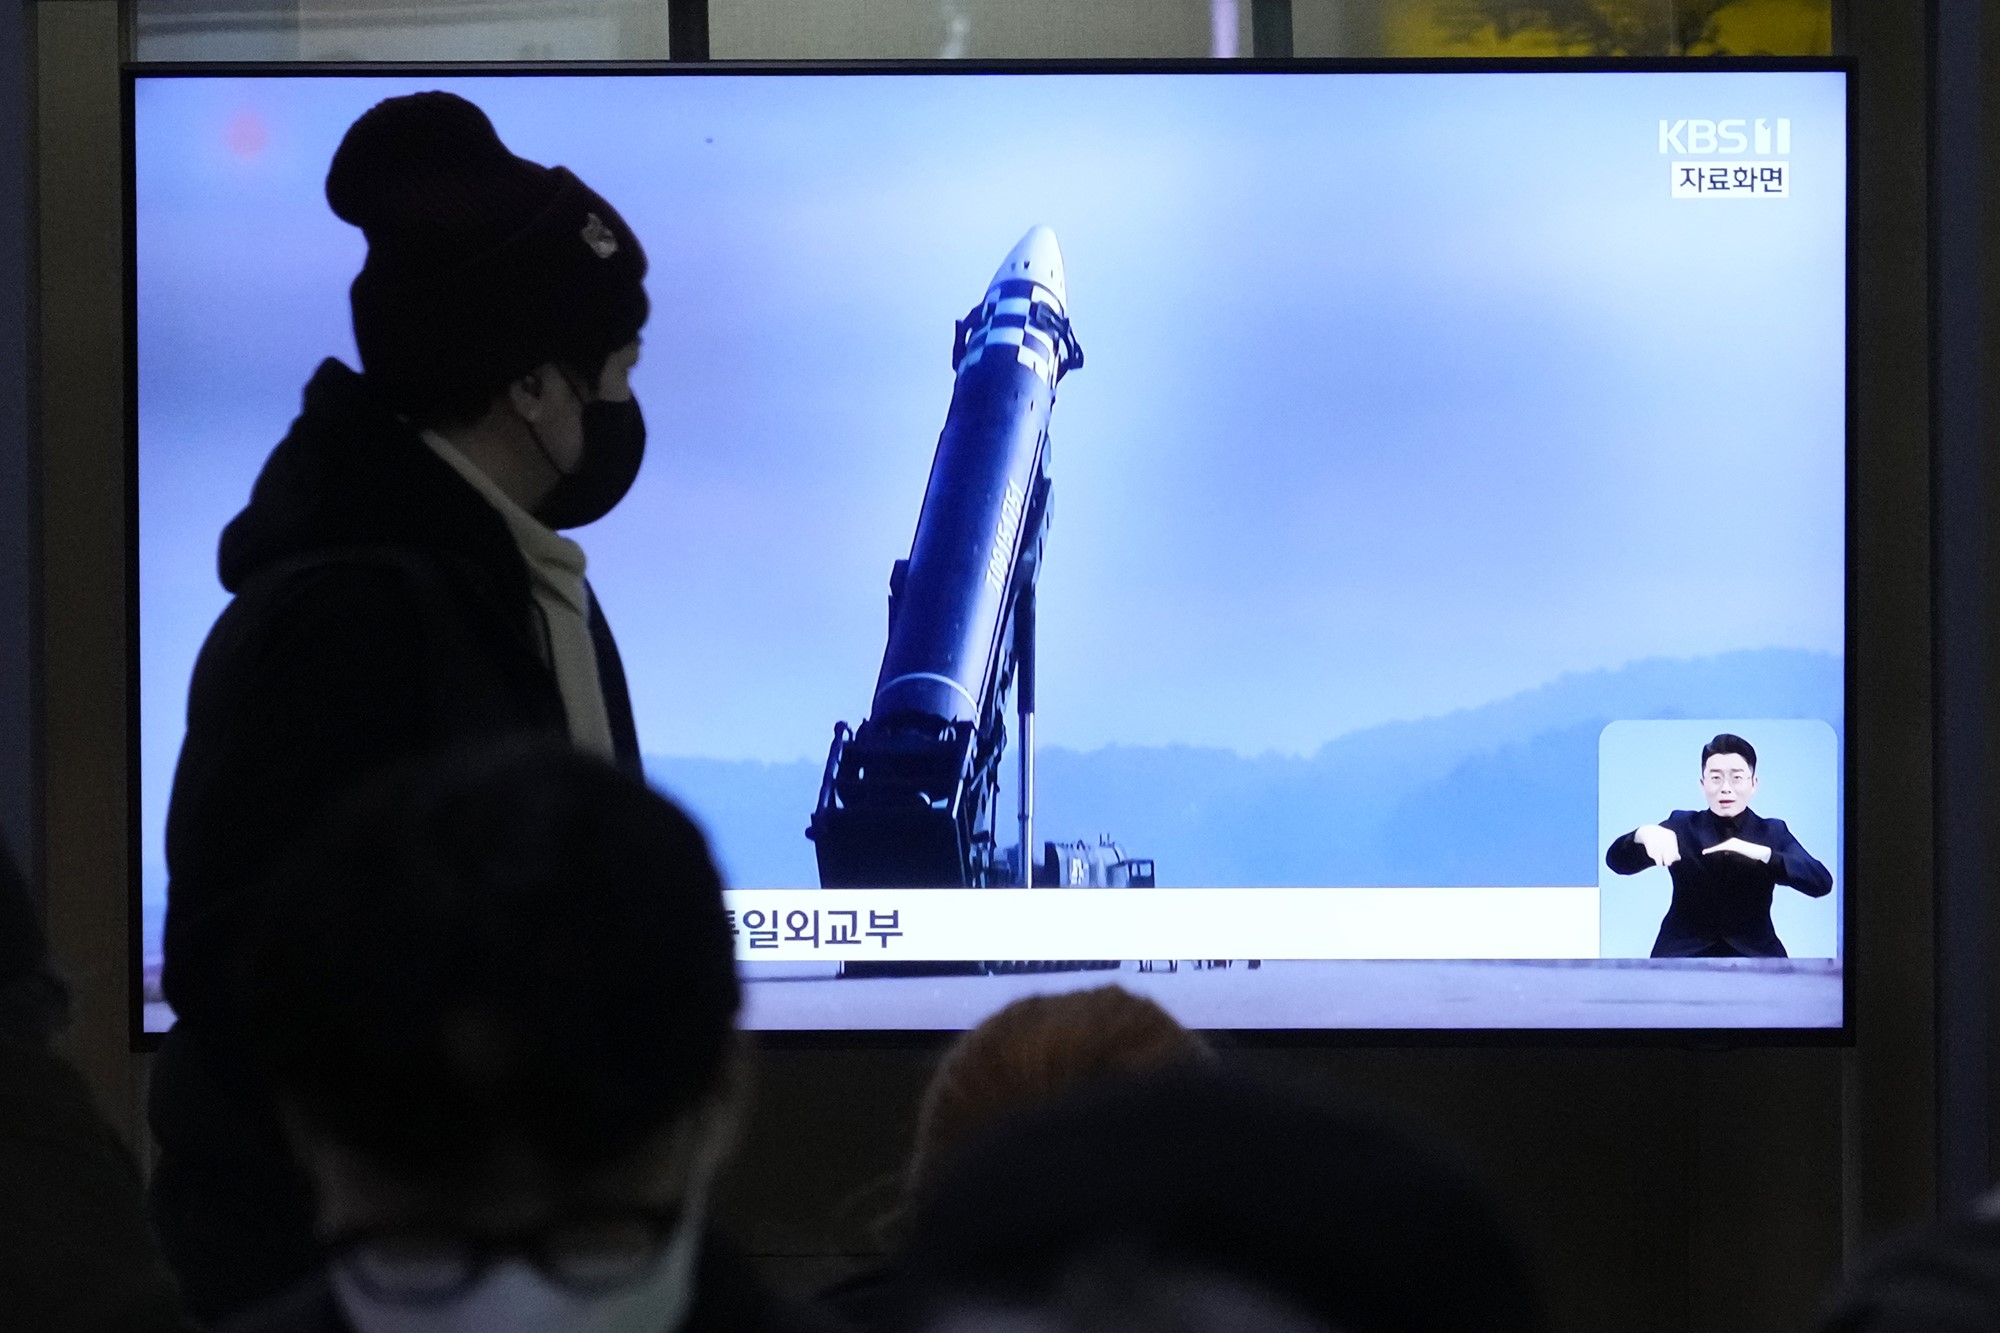 A TV screen shows a file image of North Korea's missile during a news program at the Seoul Railway Station in Seoul